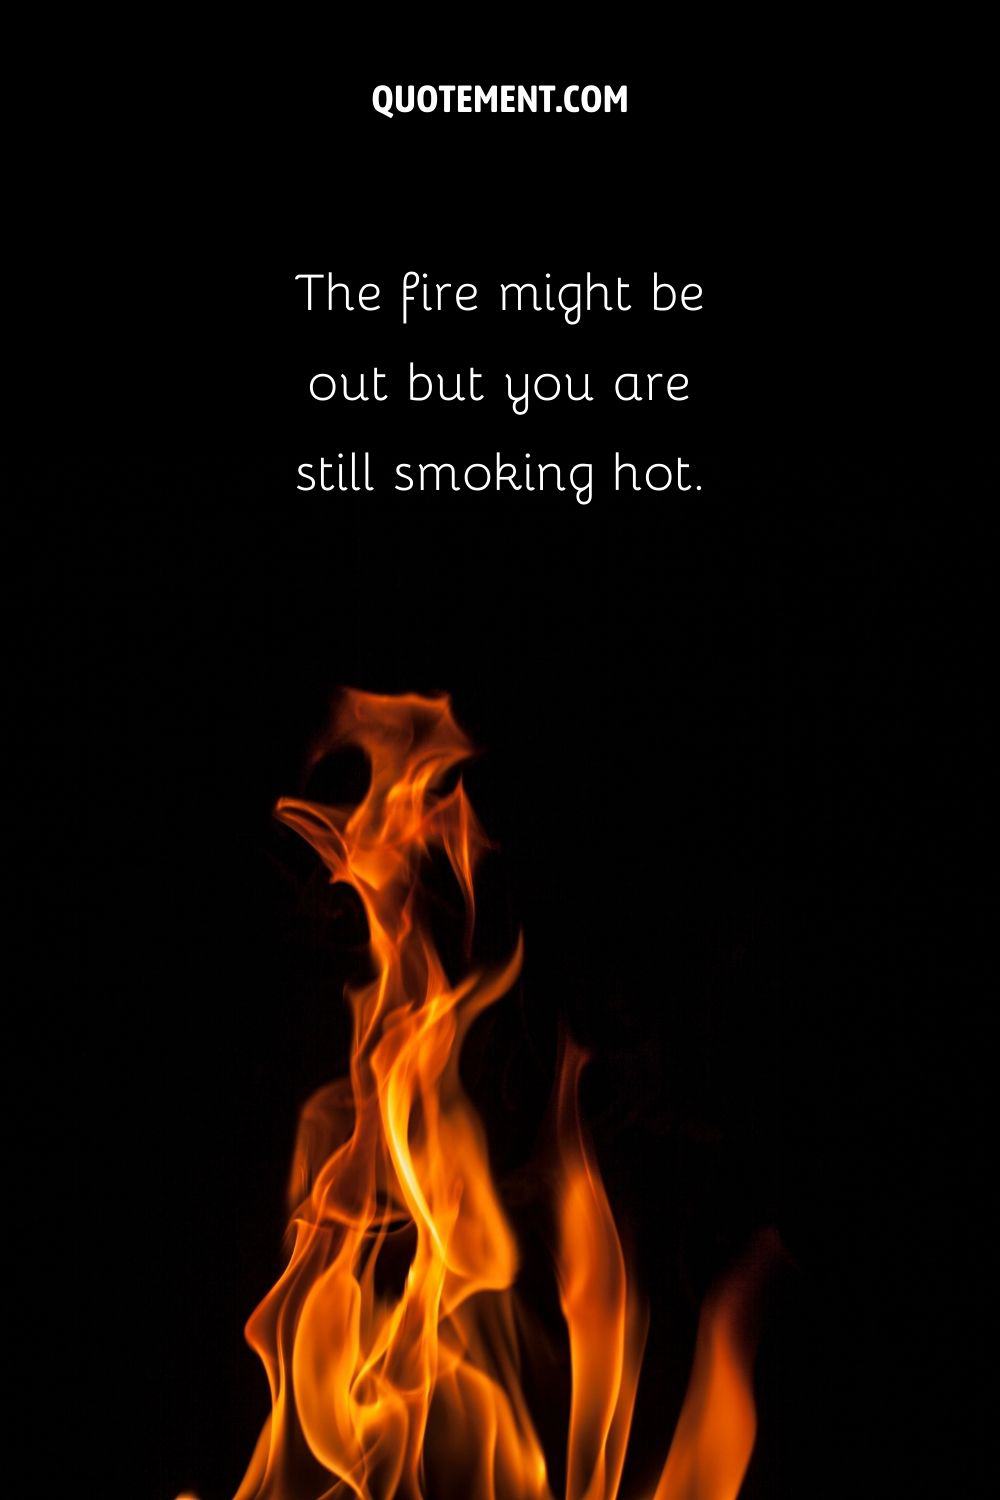 fire on a black background representing top fire pick up line